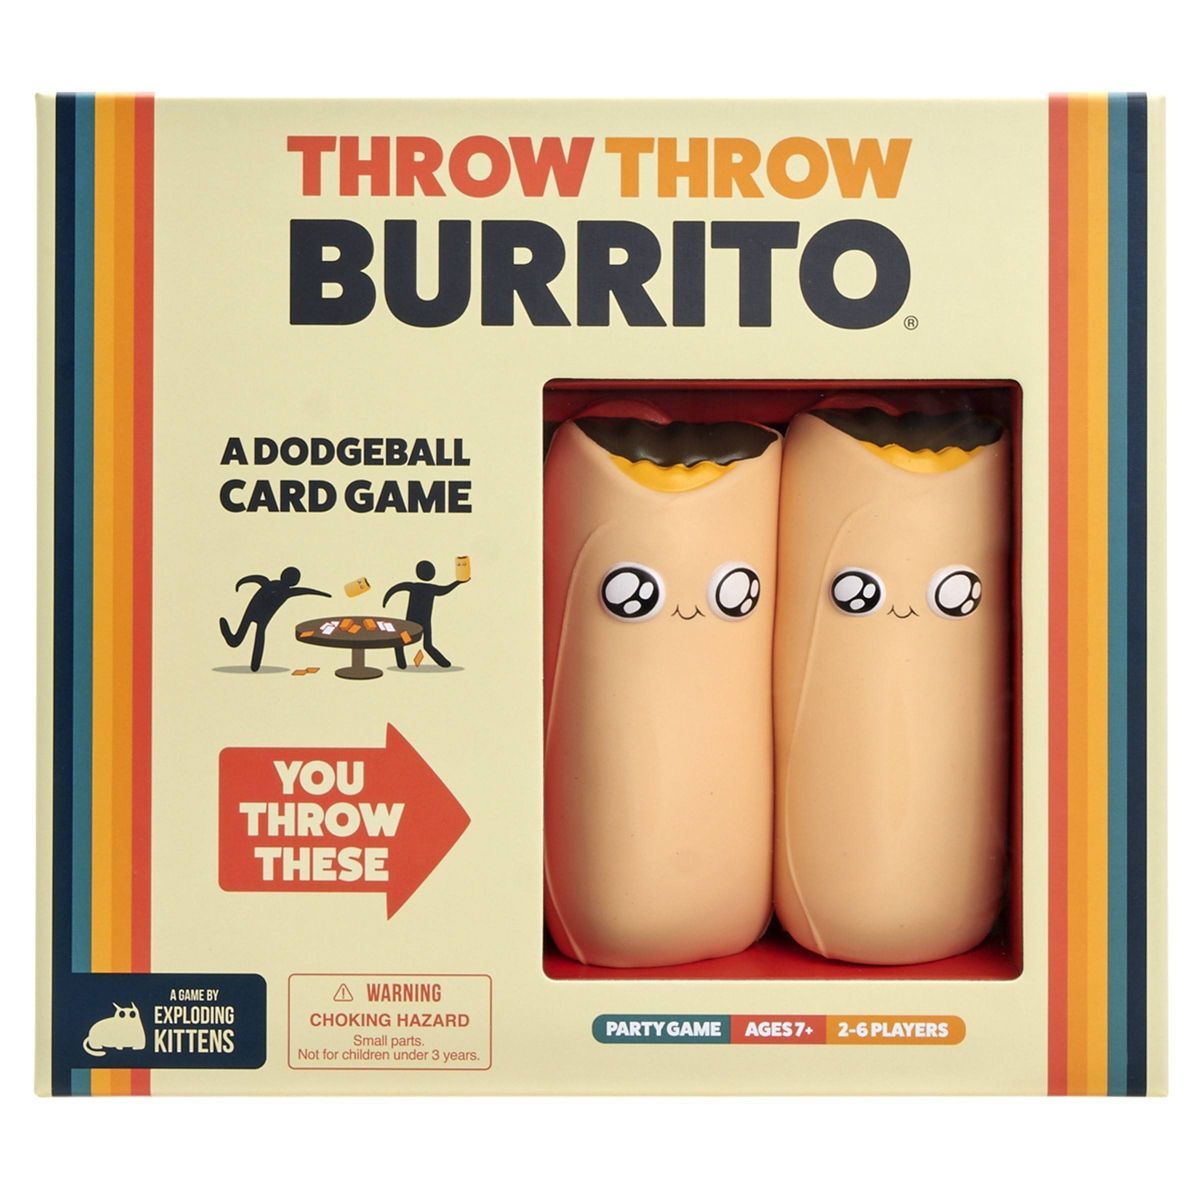 Throw Throw Burrito by Exploding Kittens - A Dodgeball Card Game | Target